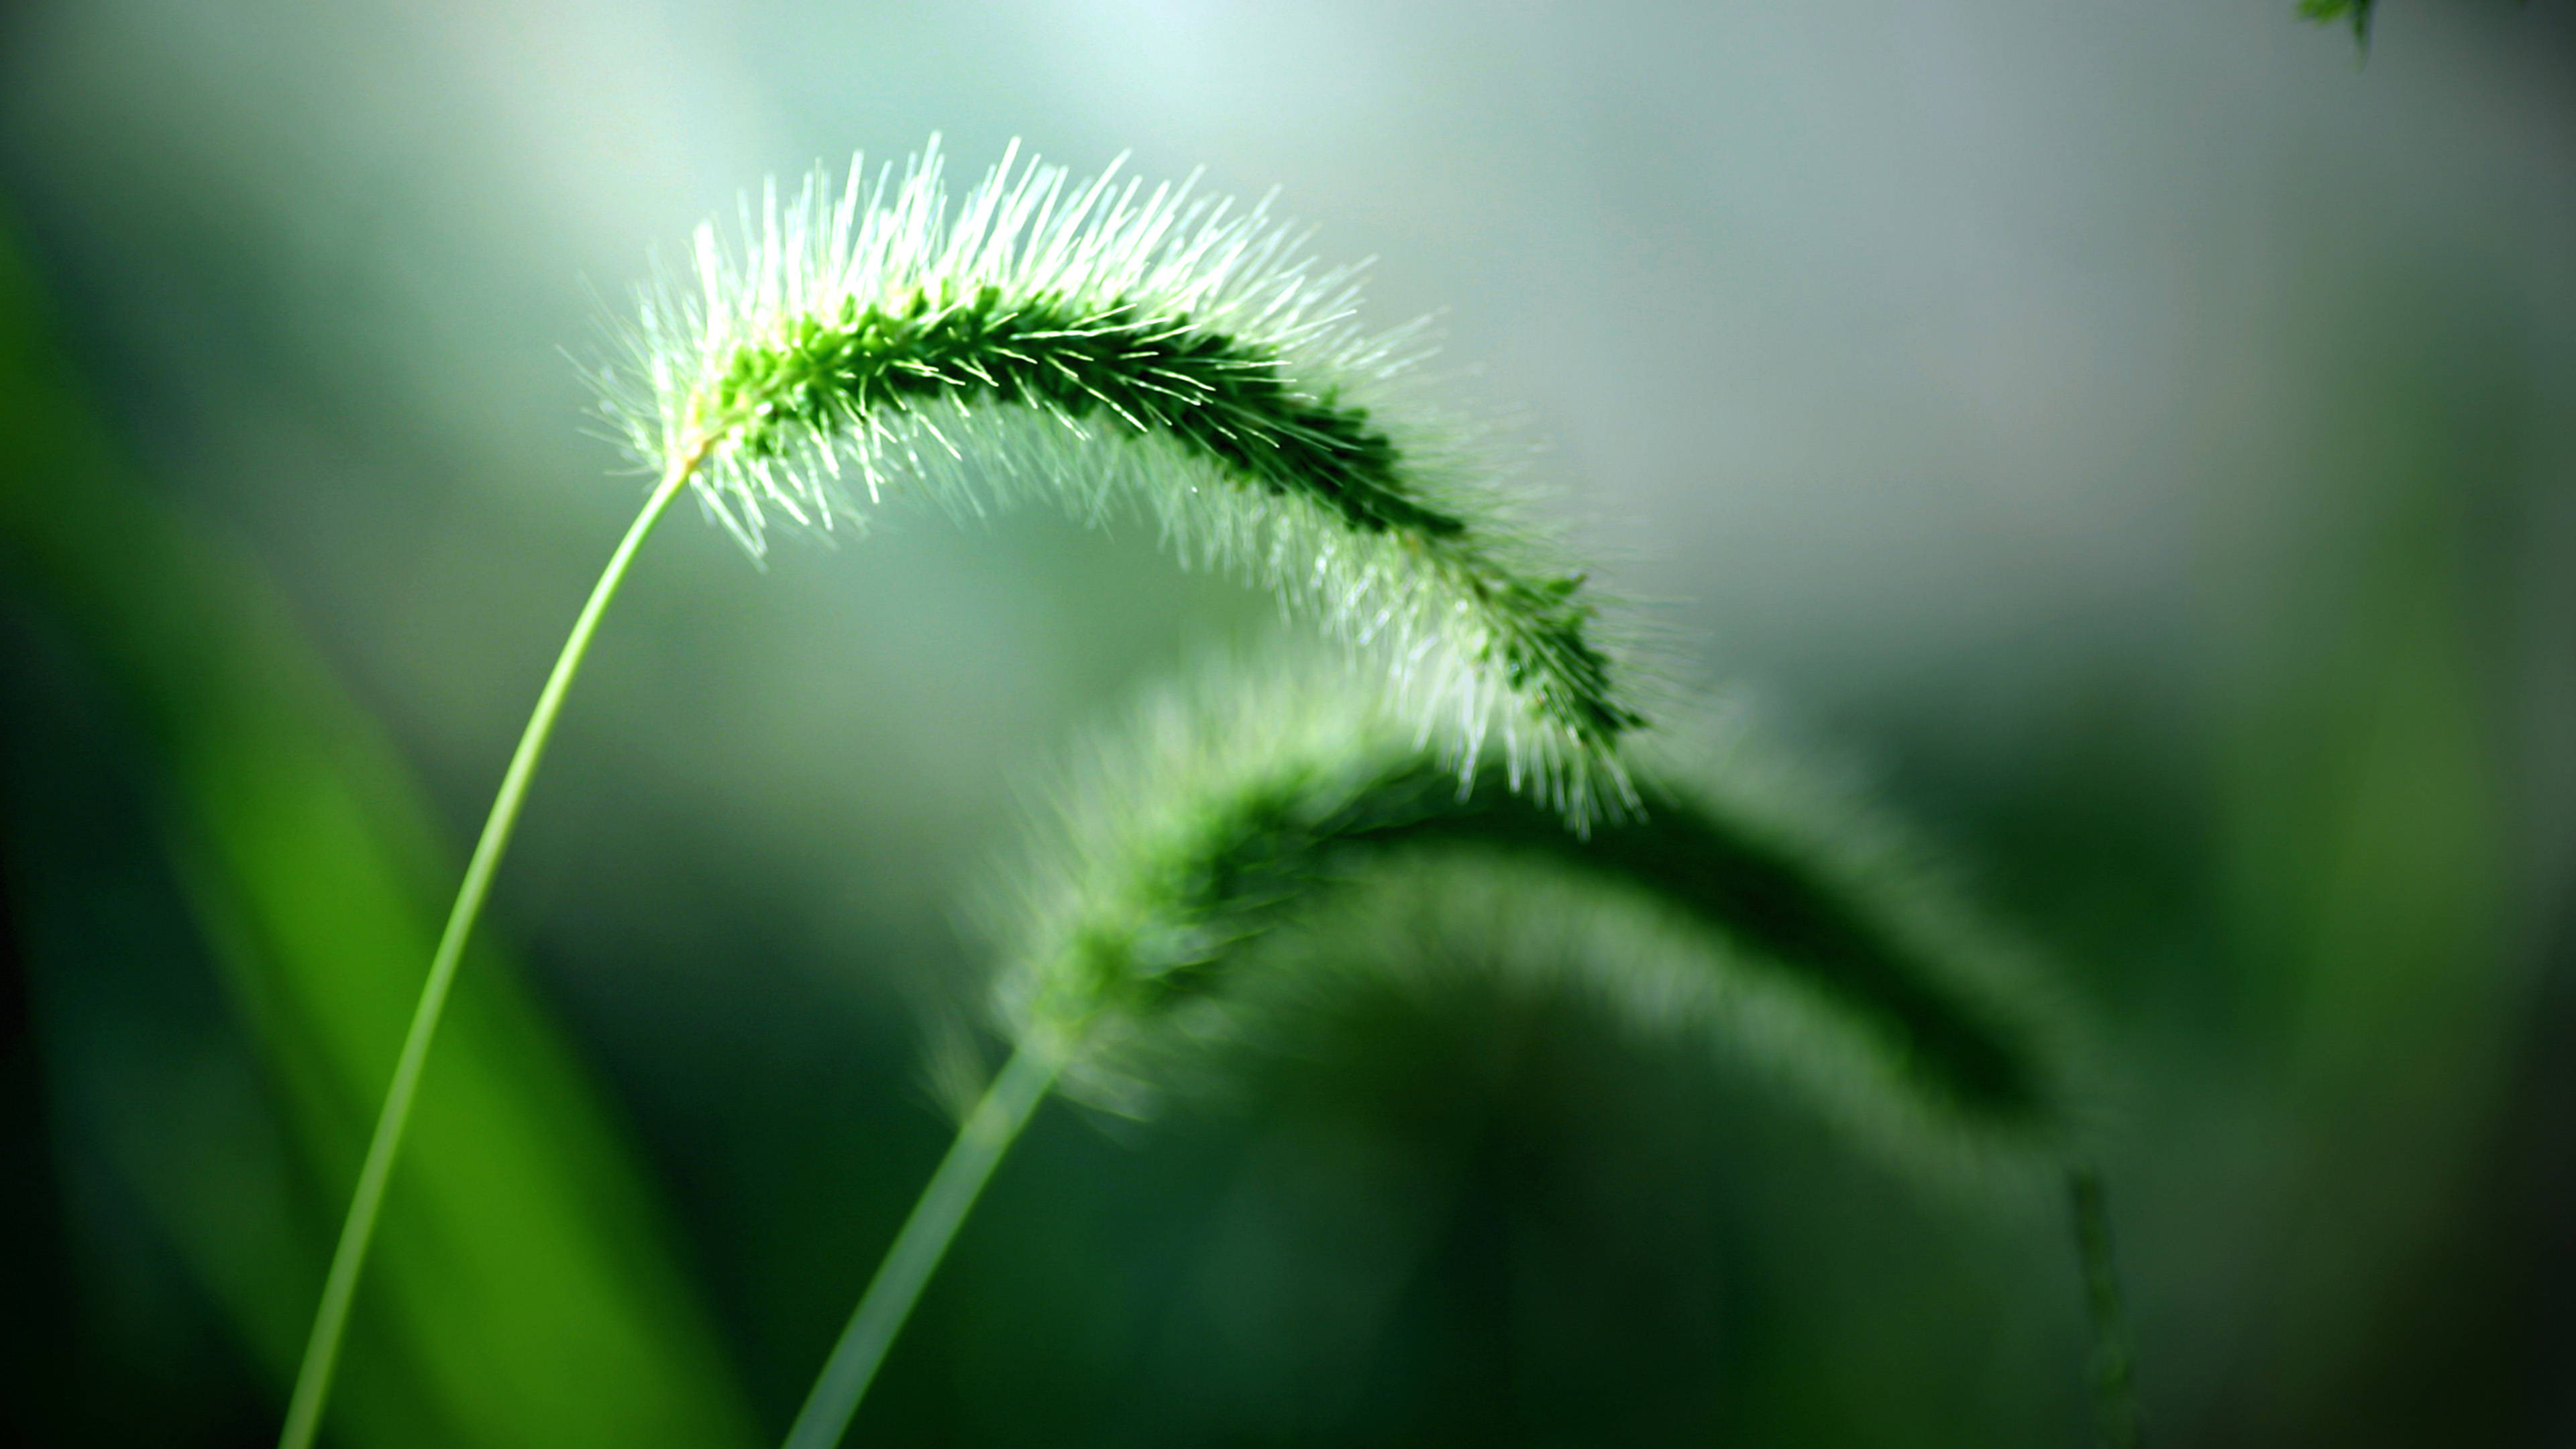 Stunning 4k Green Foxtail Plant Image